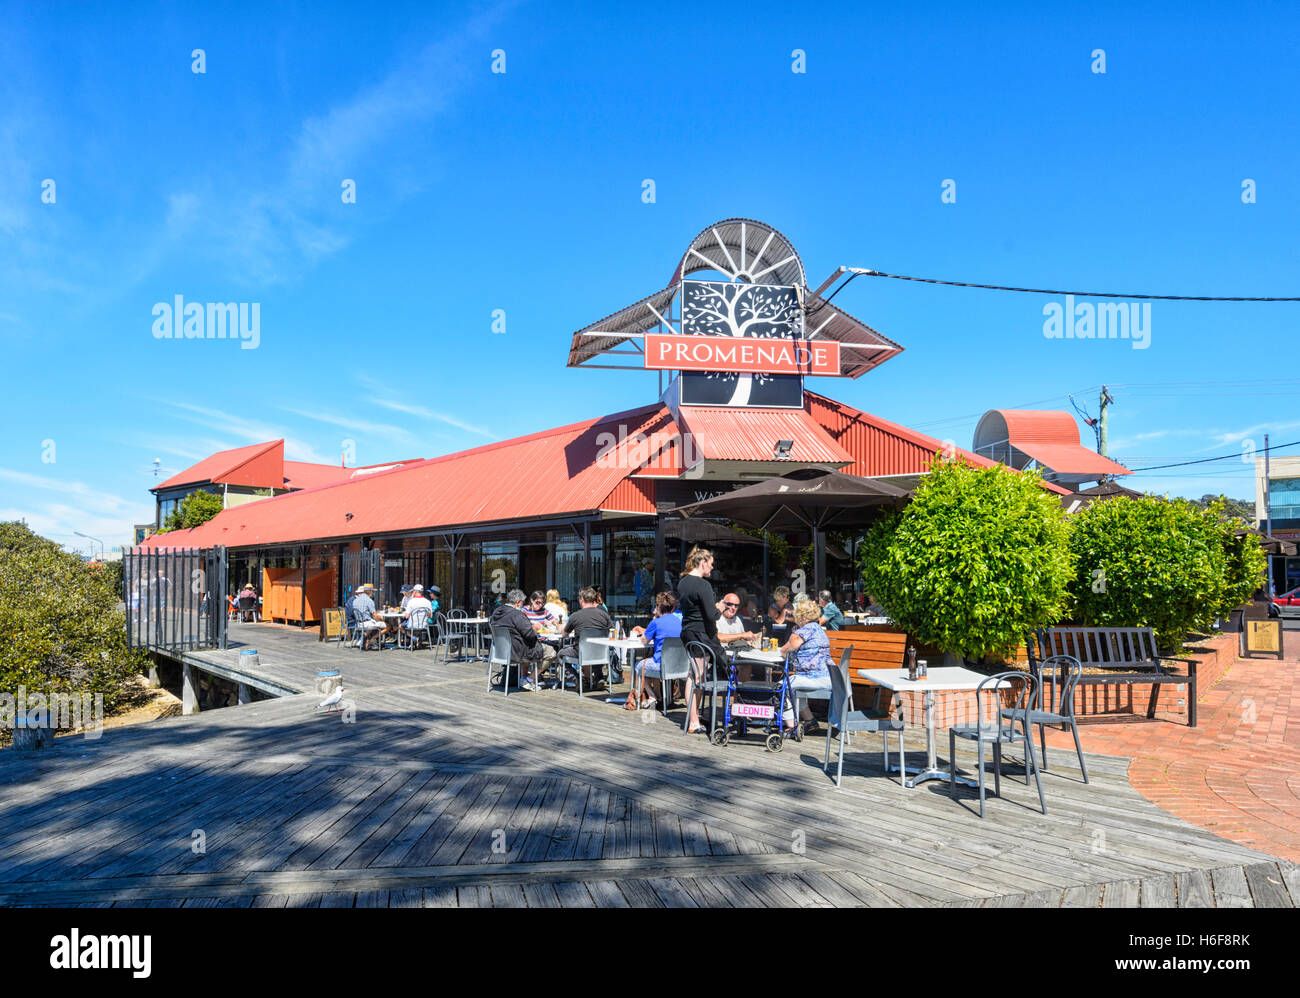 People sat at the terrace of the Promenade café and restaurant, Merimbula, New South Wales, NSW, Australia Stock Photo